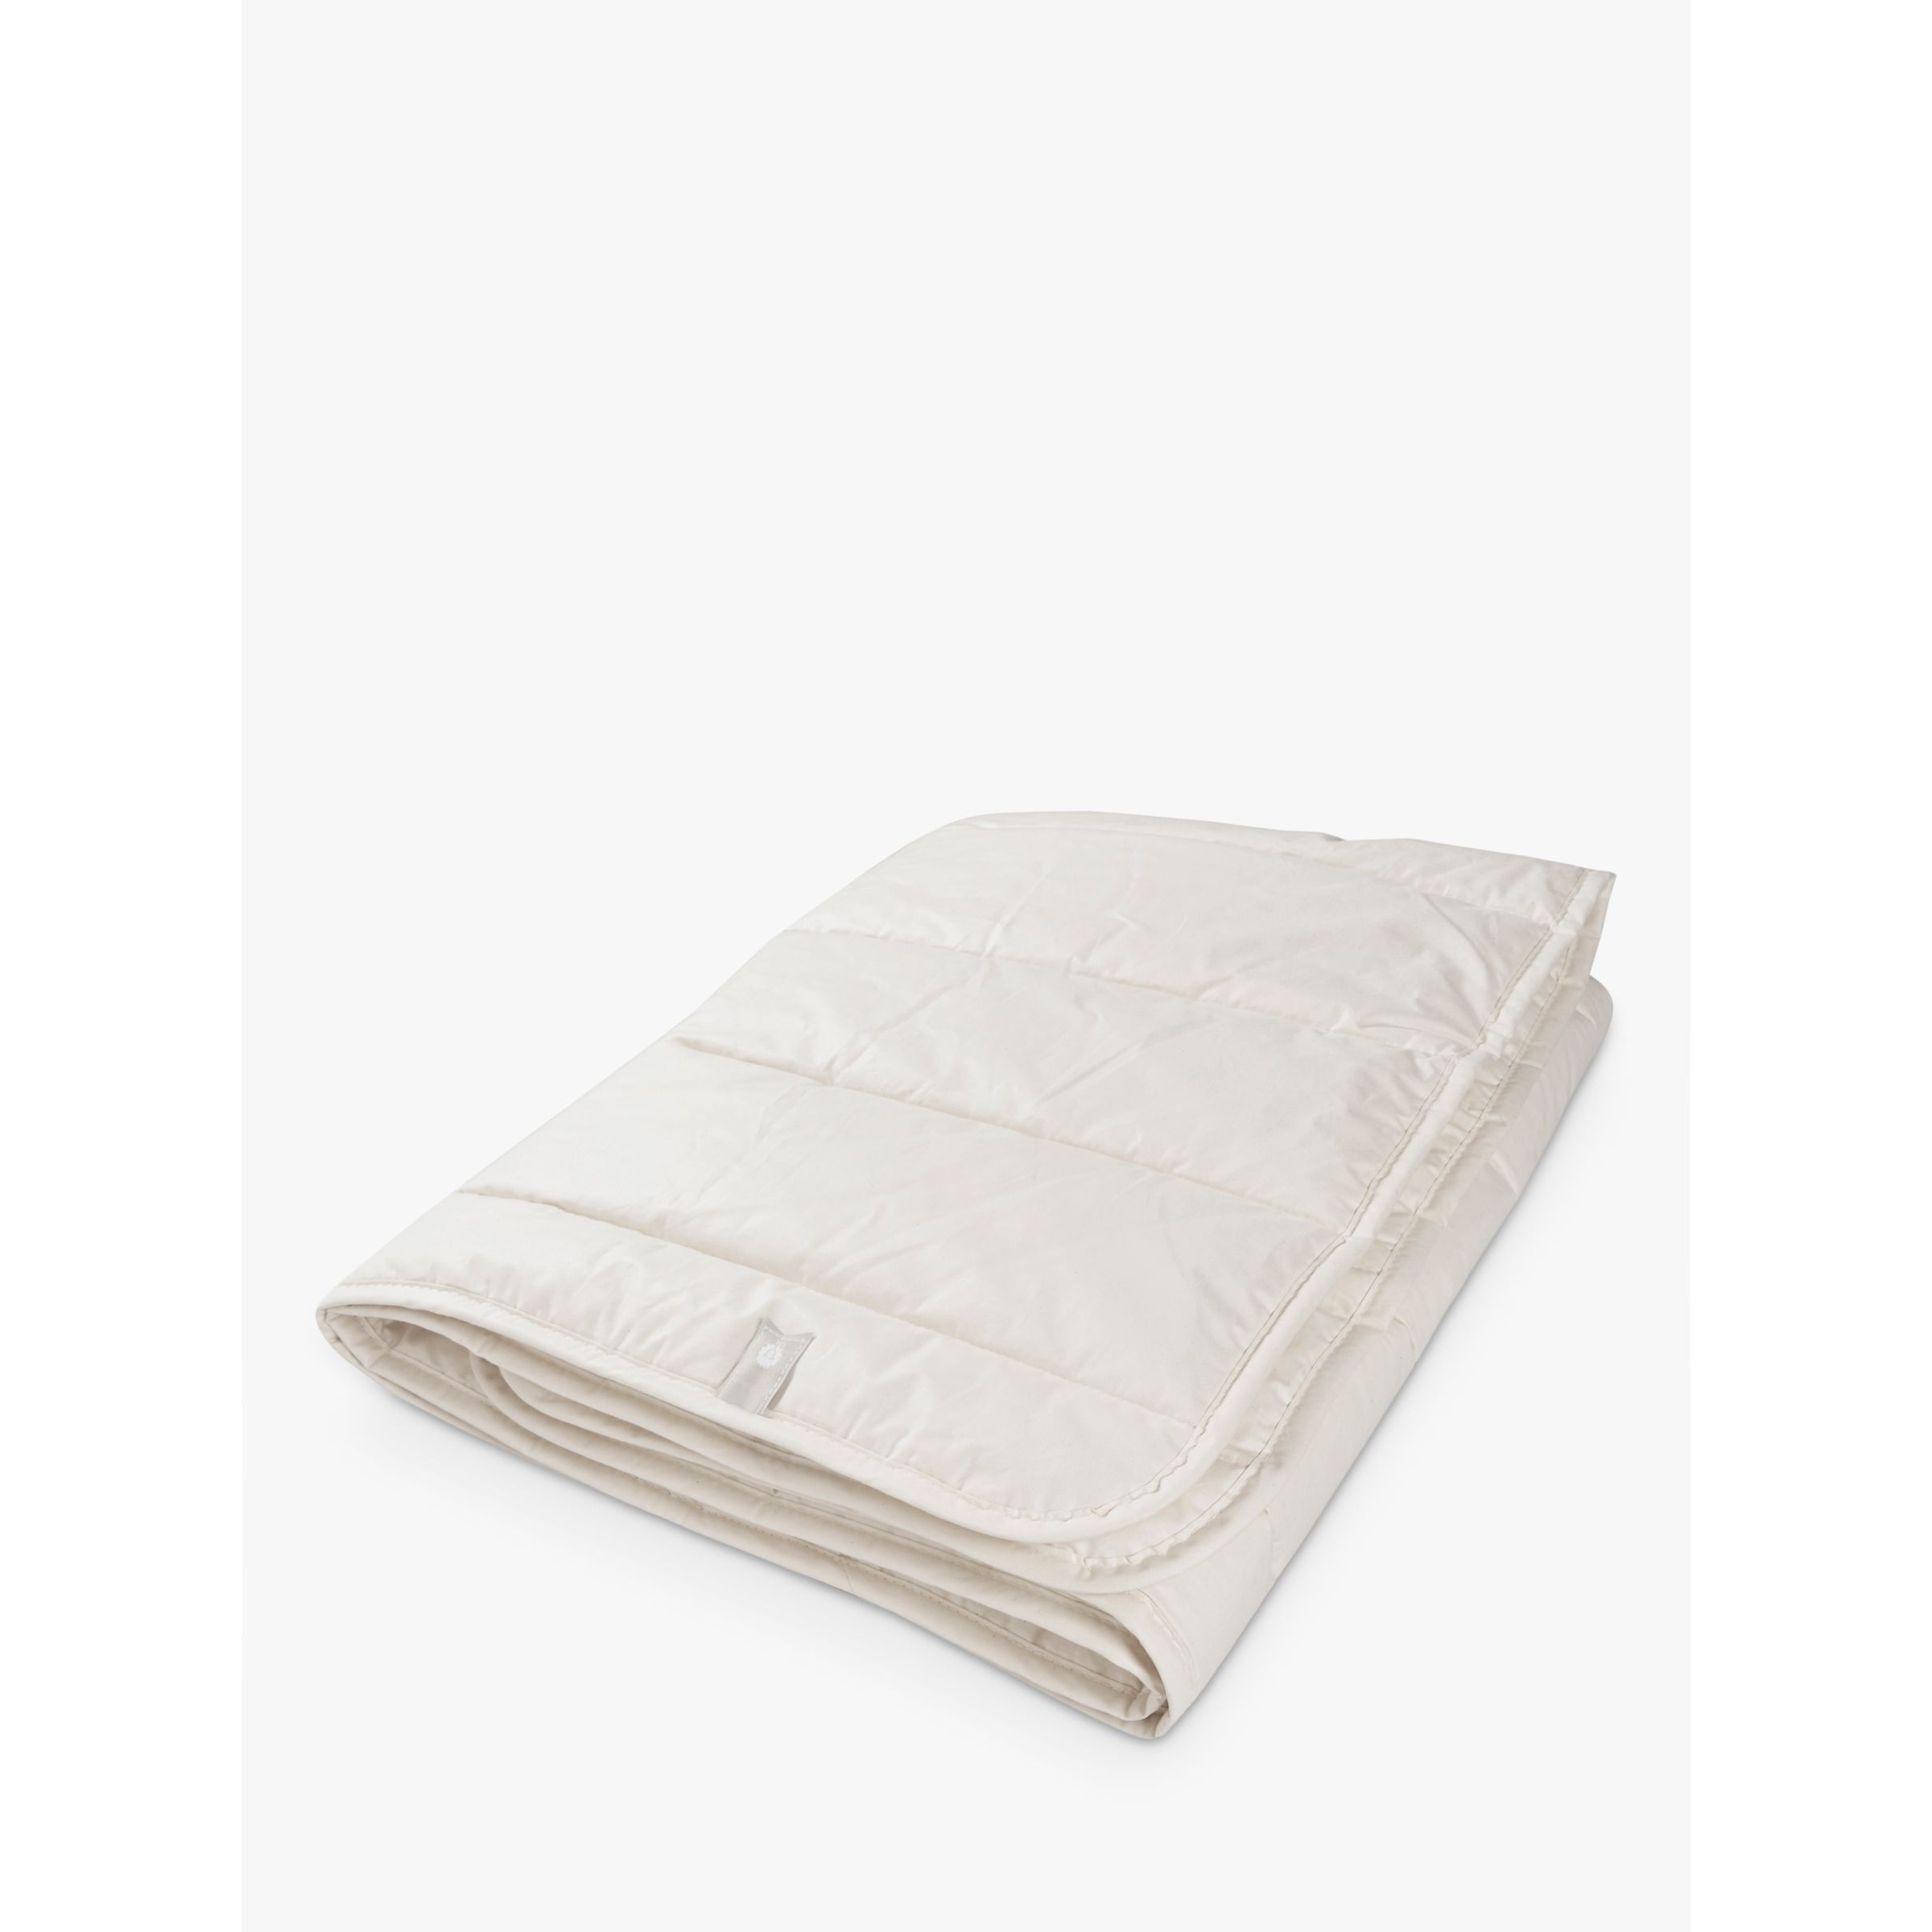 The Little Green Sheep Organic Wool Cotbed Duvet, 120 x 140cm - image 1